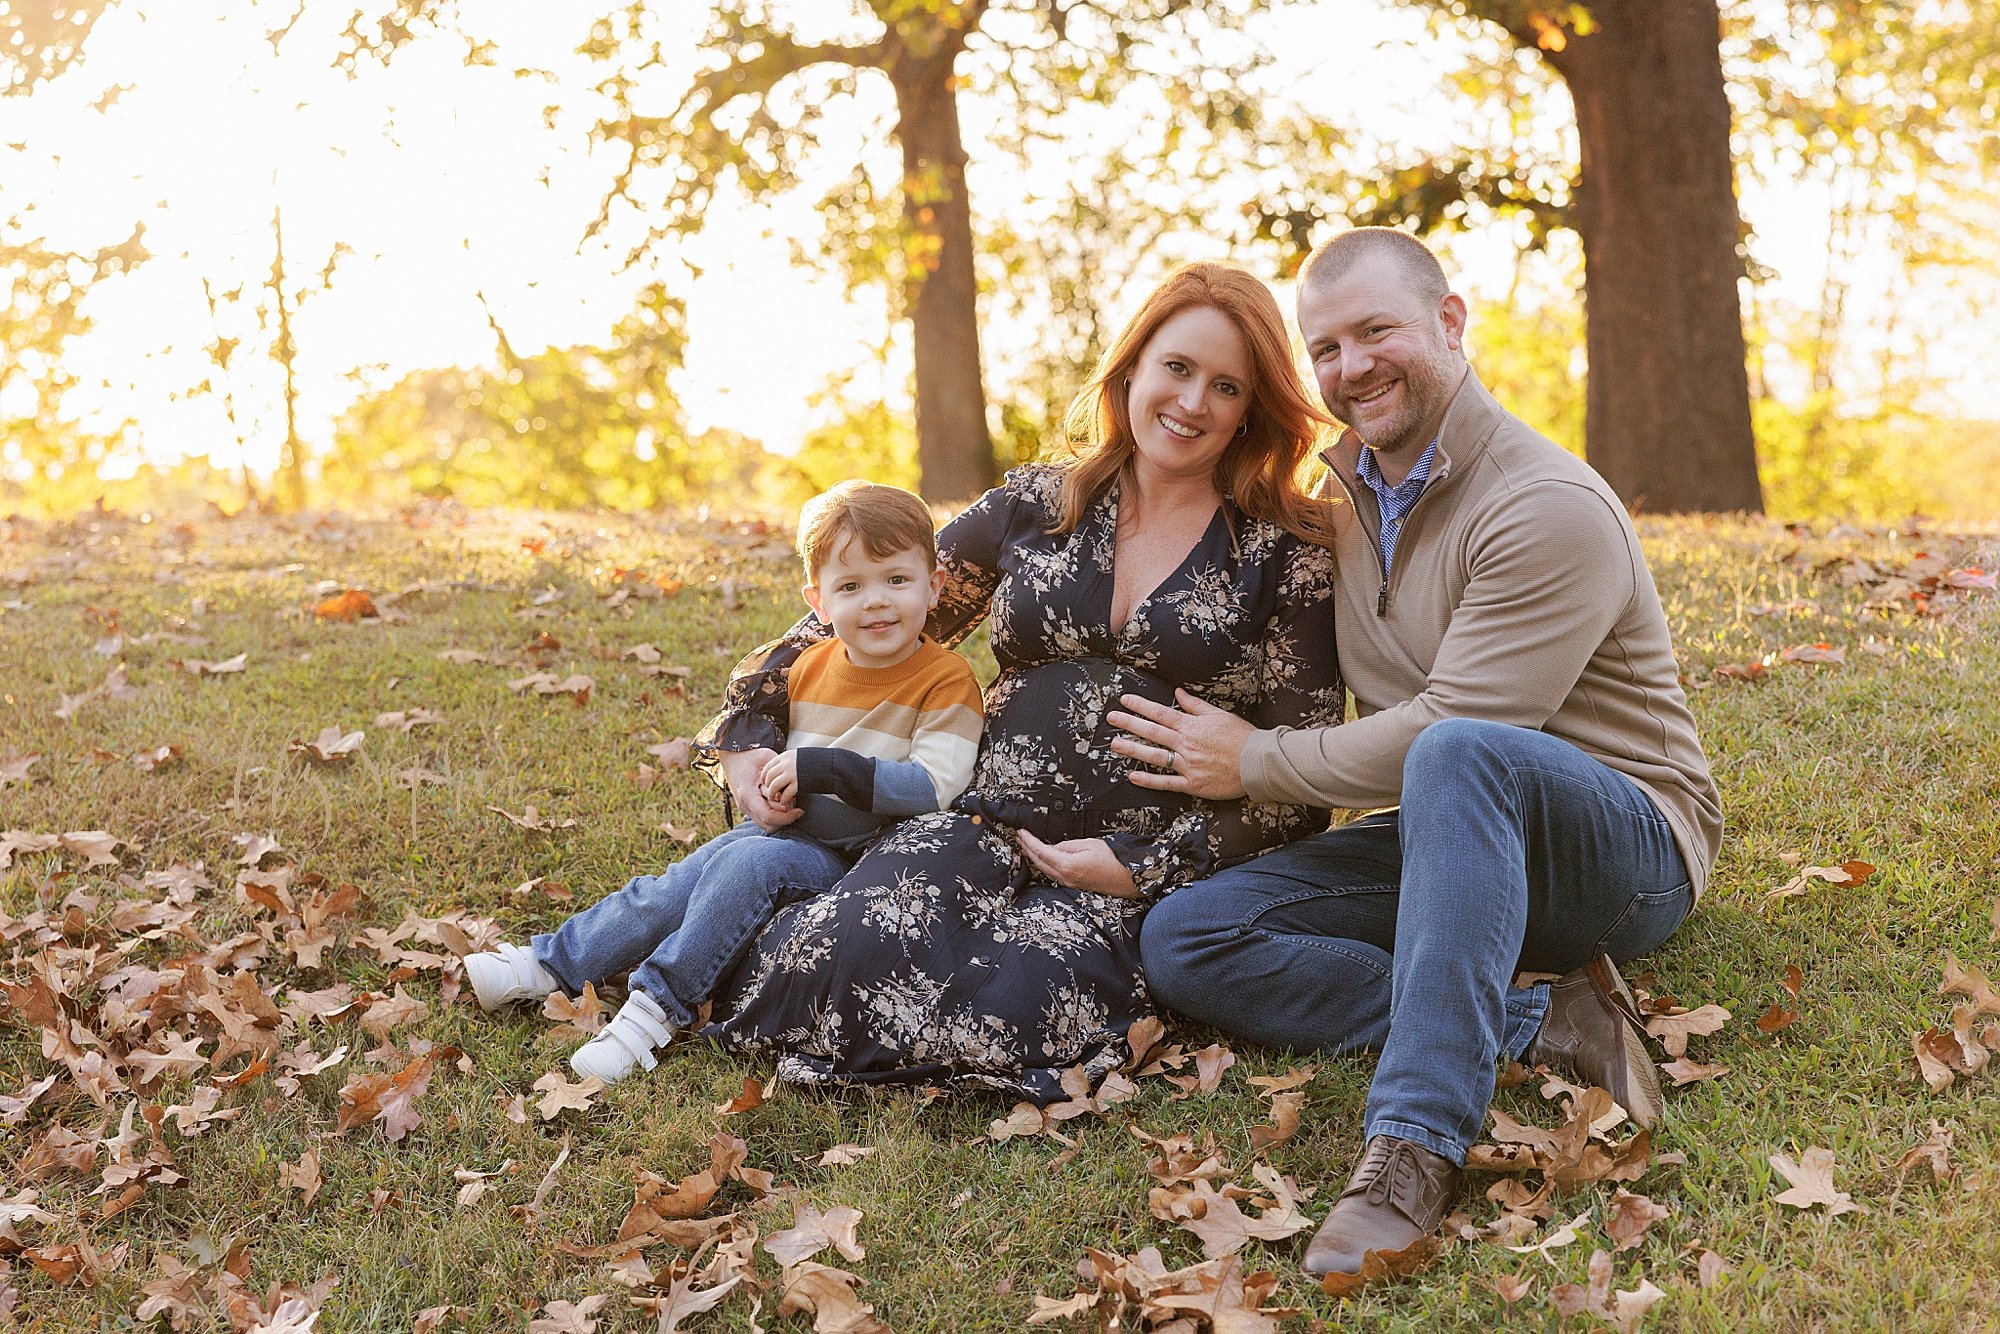 intown-atlanta-decatur-brookhaven-buckhead-outdoor-fall-pictures-family-maternity-photoshoot_5575.jpg